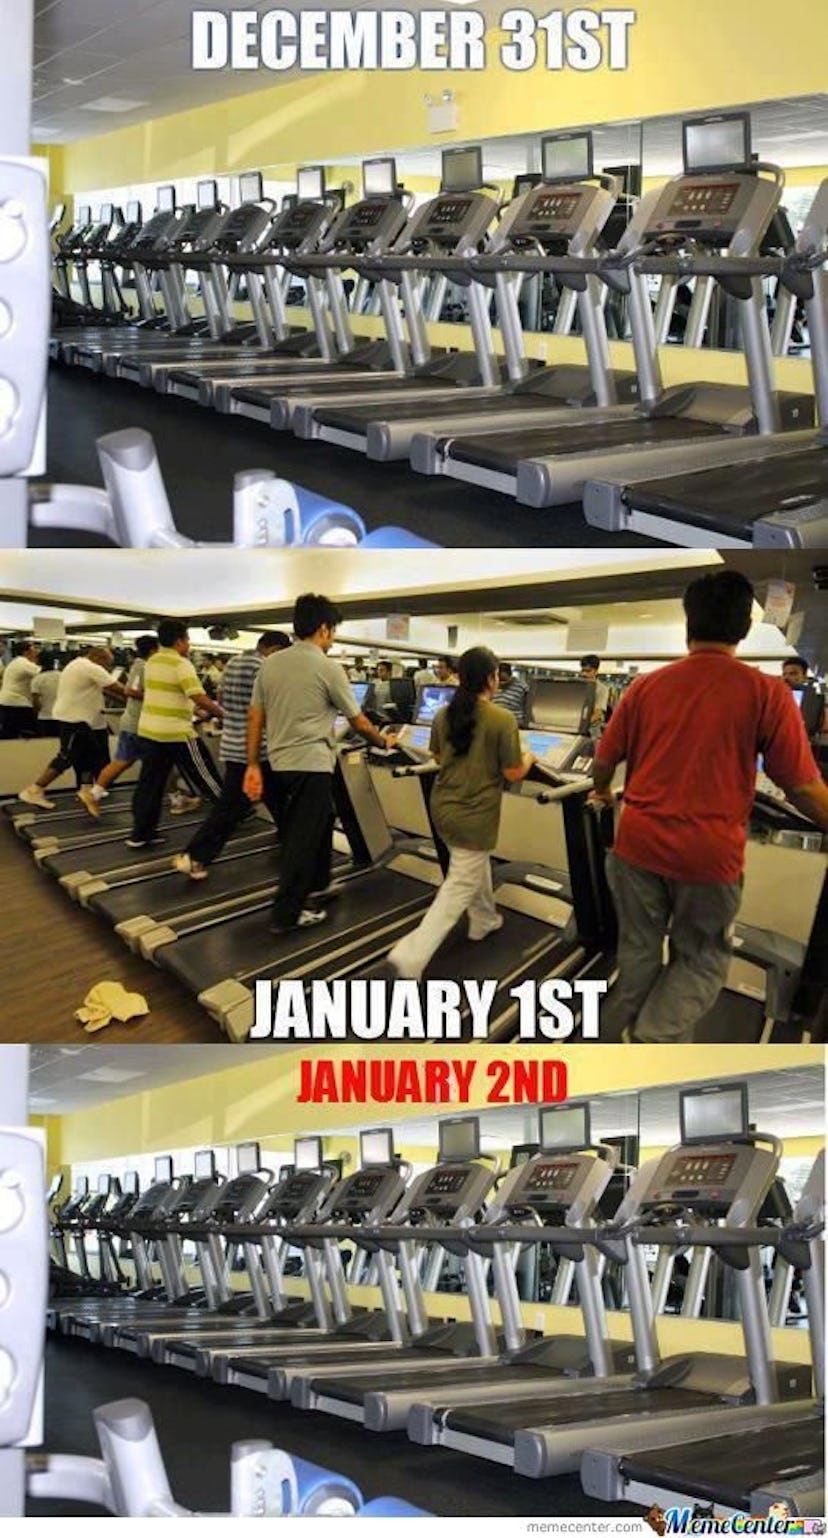 A meme showing a full gym on January 1st but also empty on December 31st and January 2nd